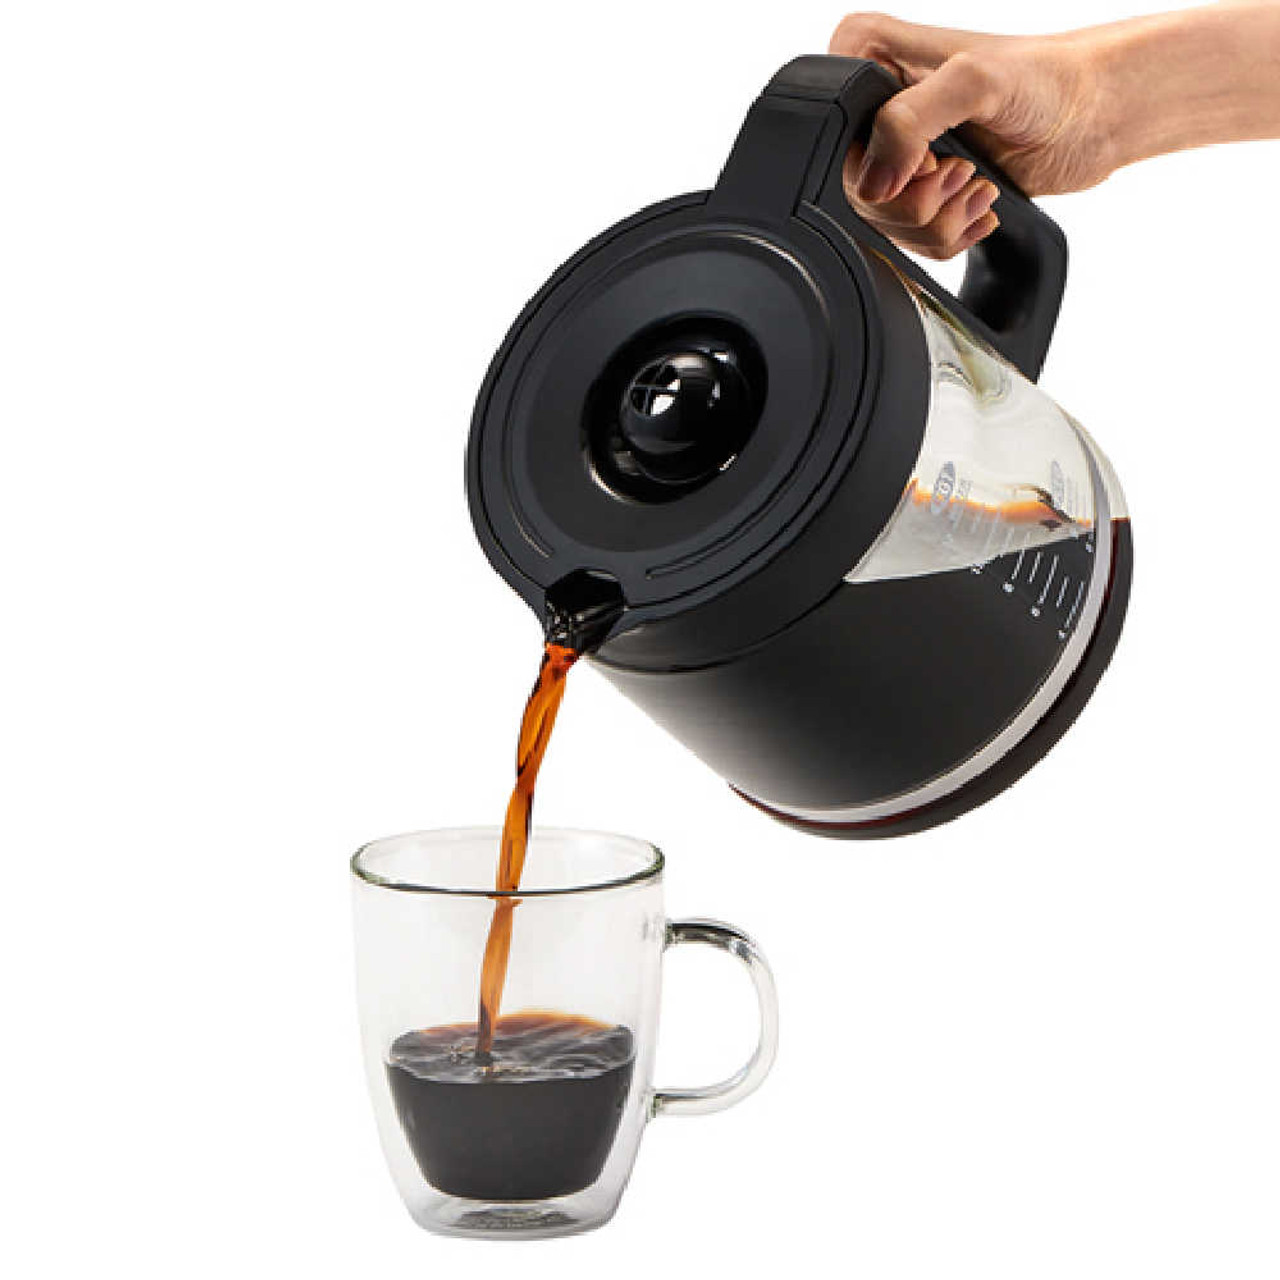 https://cdn11.bigcommerce.com/s-hccytny0od/images/stencil/1280x1280/products/5379/23354/Zojirushi_Dome_Brew_Classic_Coffee_Maker_3__80158.1681233631.jpg?c=2?imbypass=on